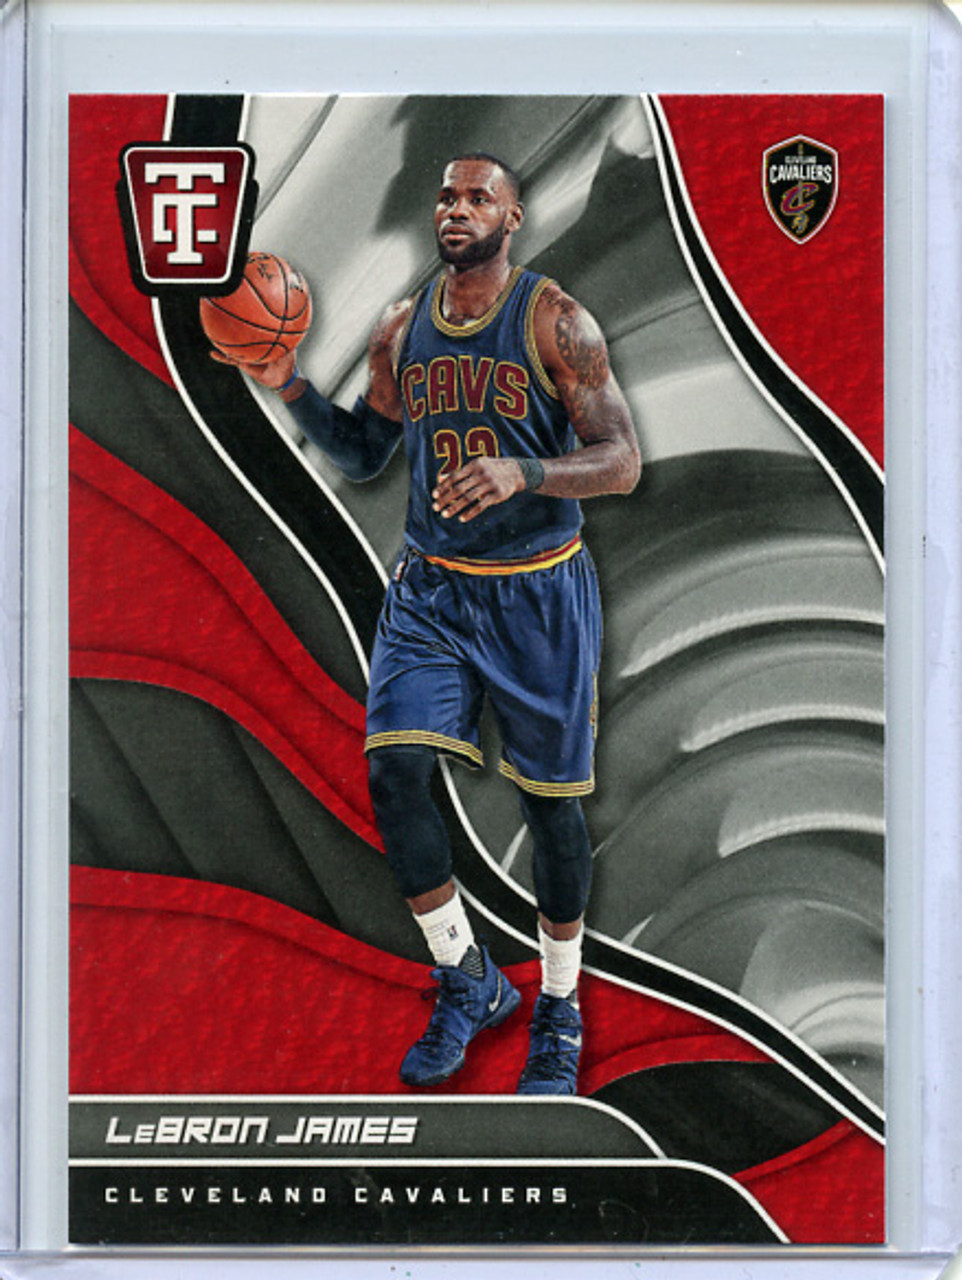 Lebron James 2017-18 Totally Certified #27